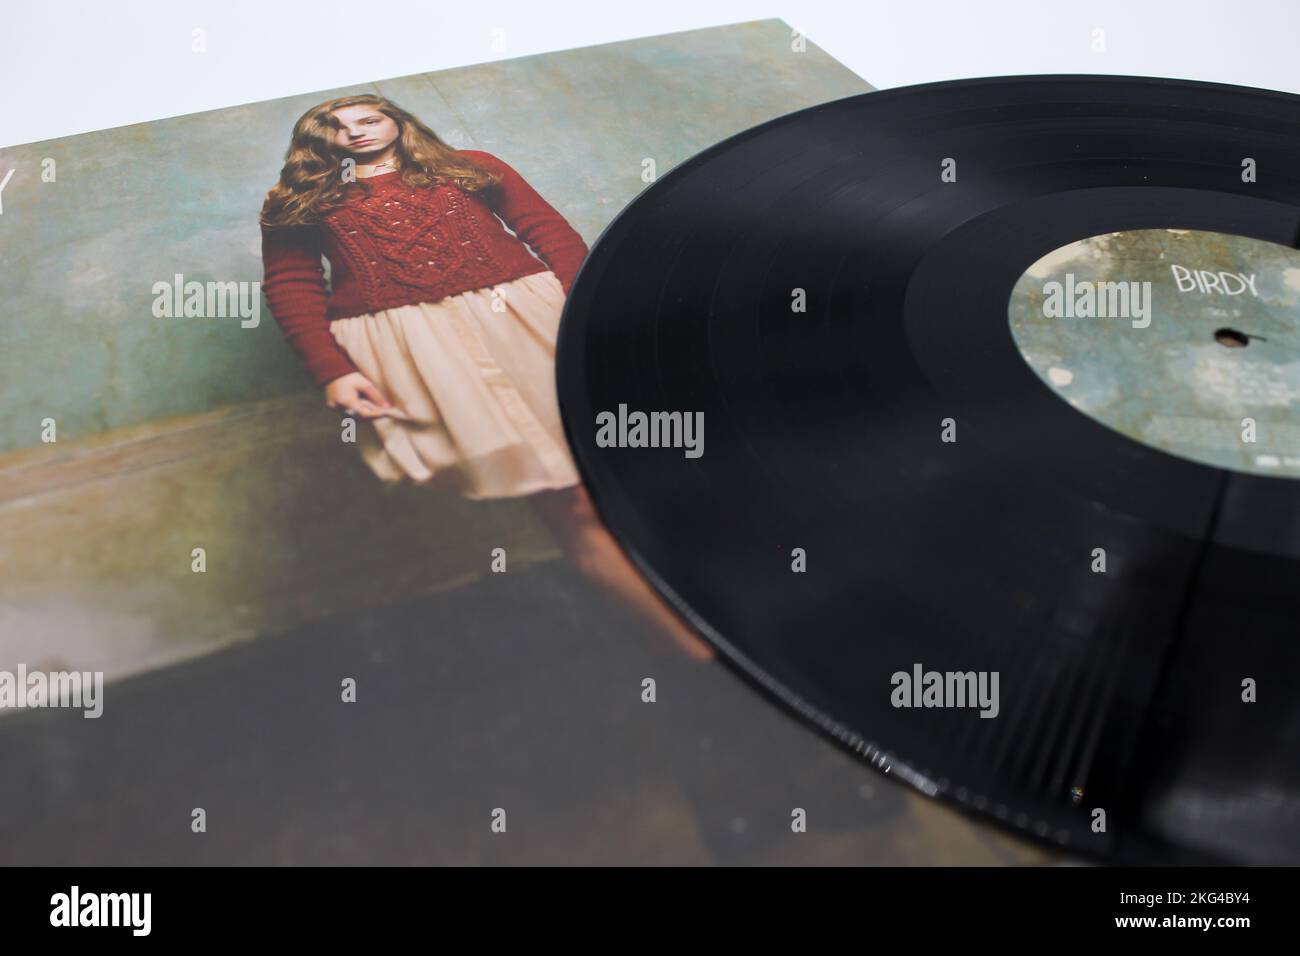 English singer and songwriter Birdy, music album on vinyl record LP disc. The record is self titled. She sings indie folk music. Stock Photo